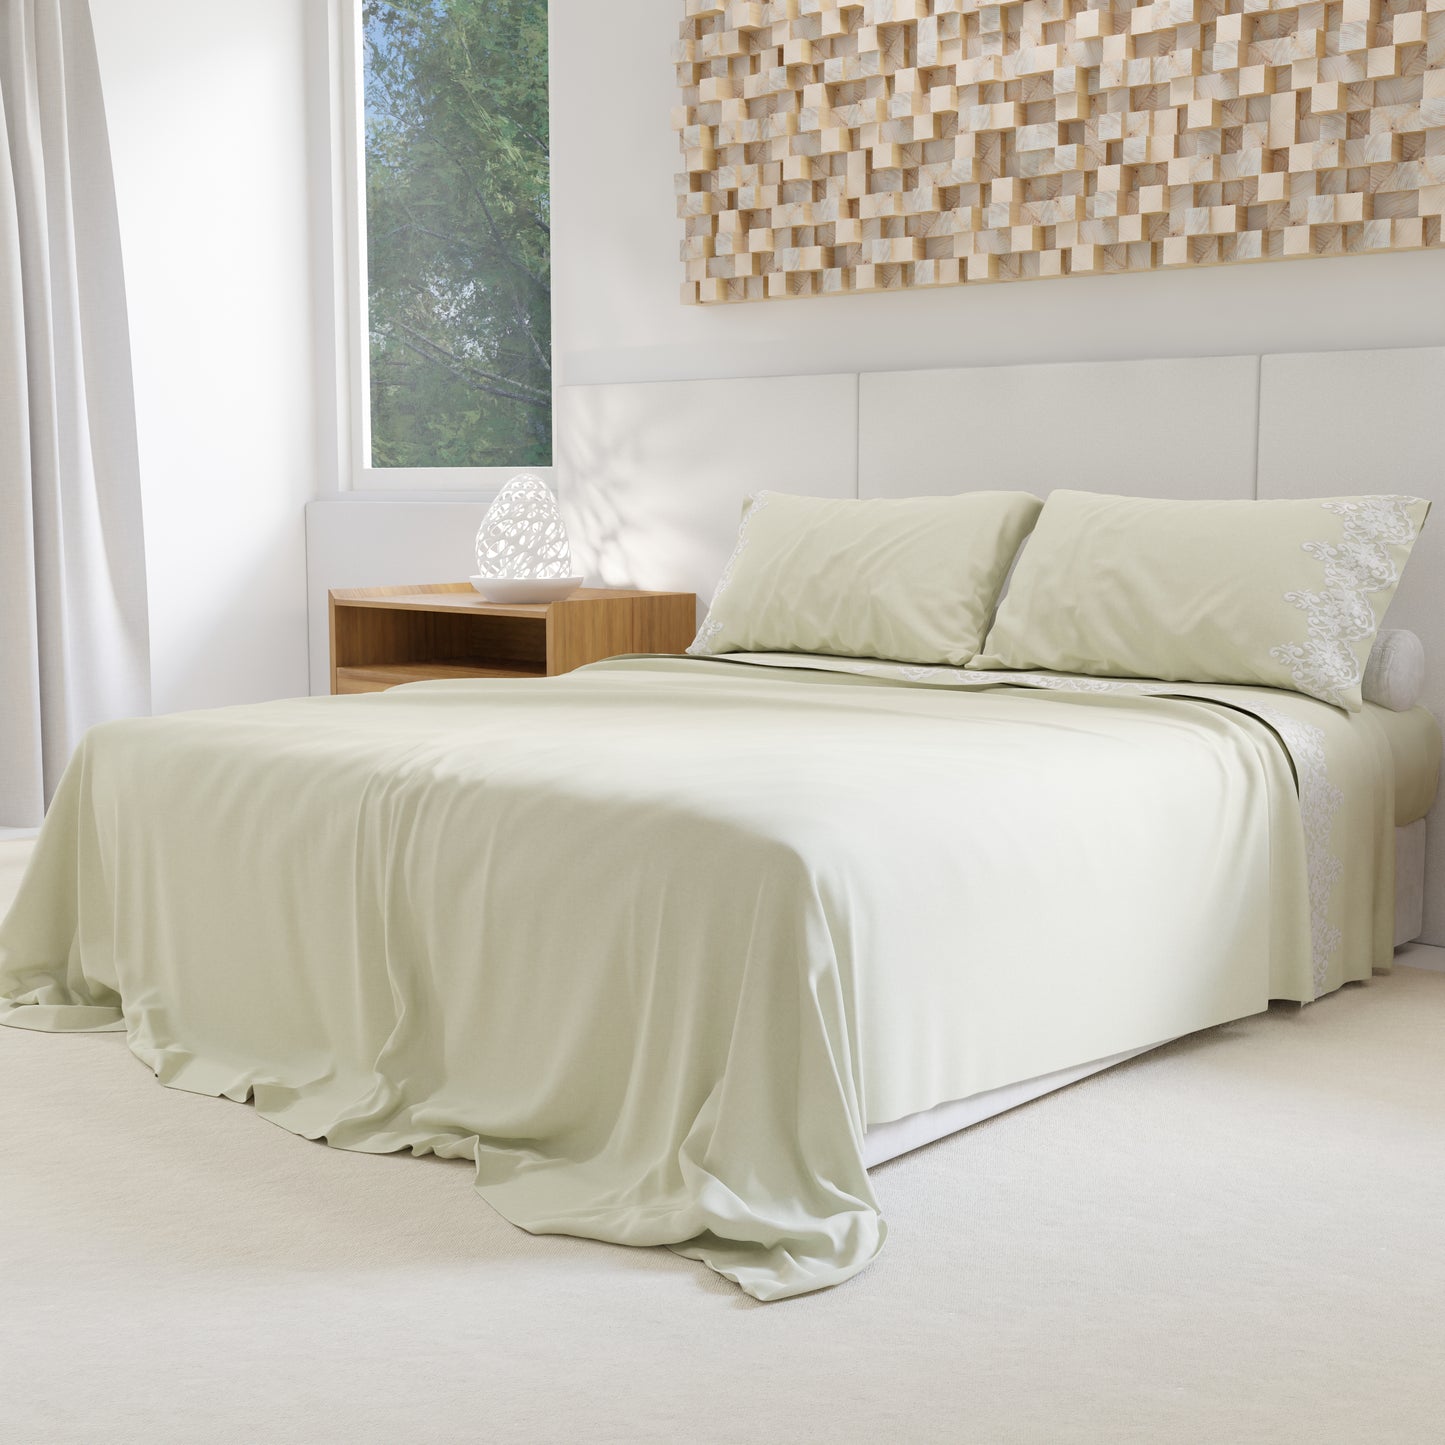 Percale Sheets with Lace, Cream Cotton Double Sheets